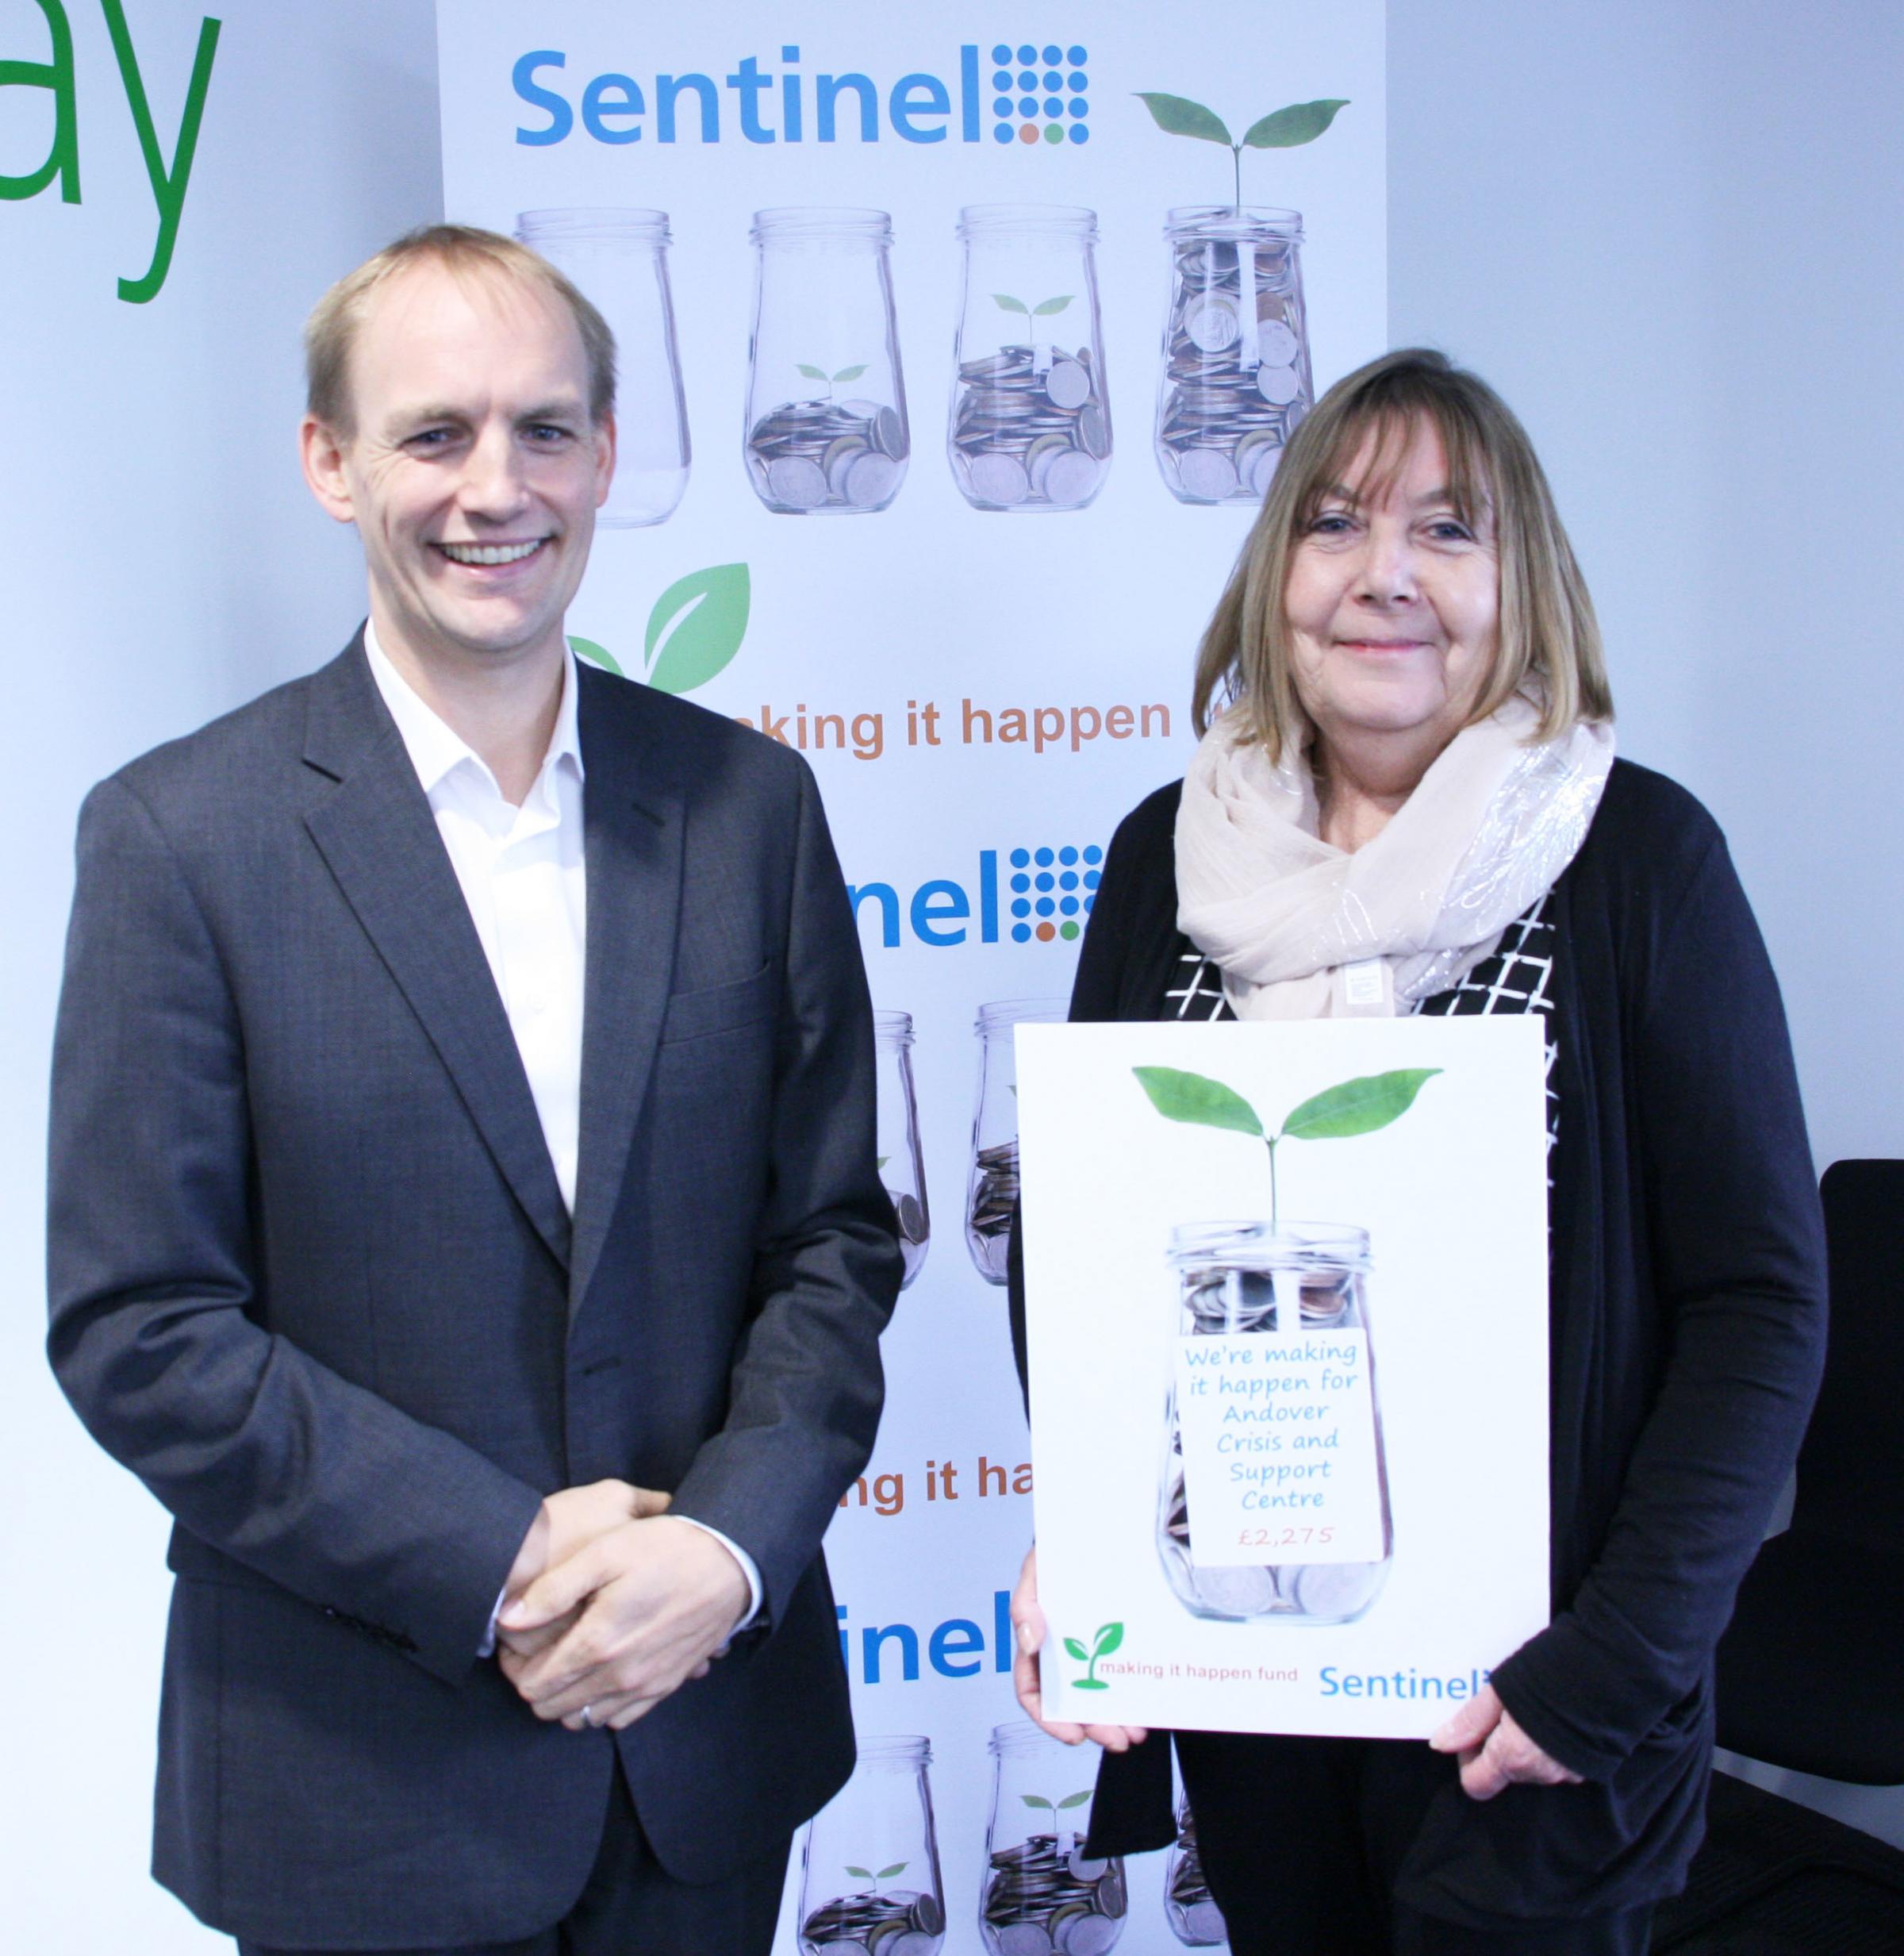 Julian Chun, Operations Director of Sentinel with Yvonne 